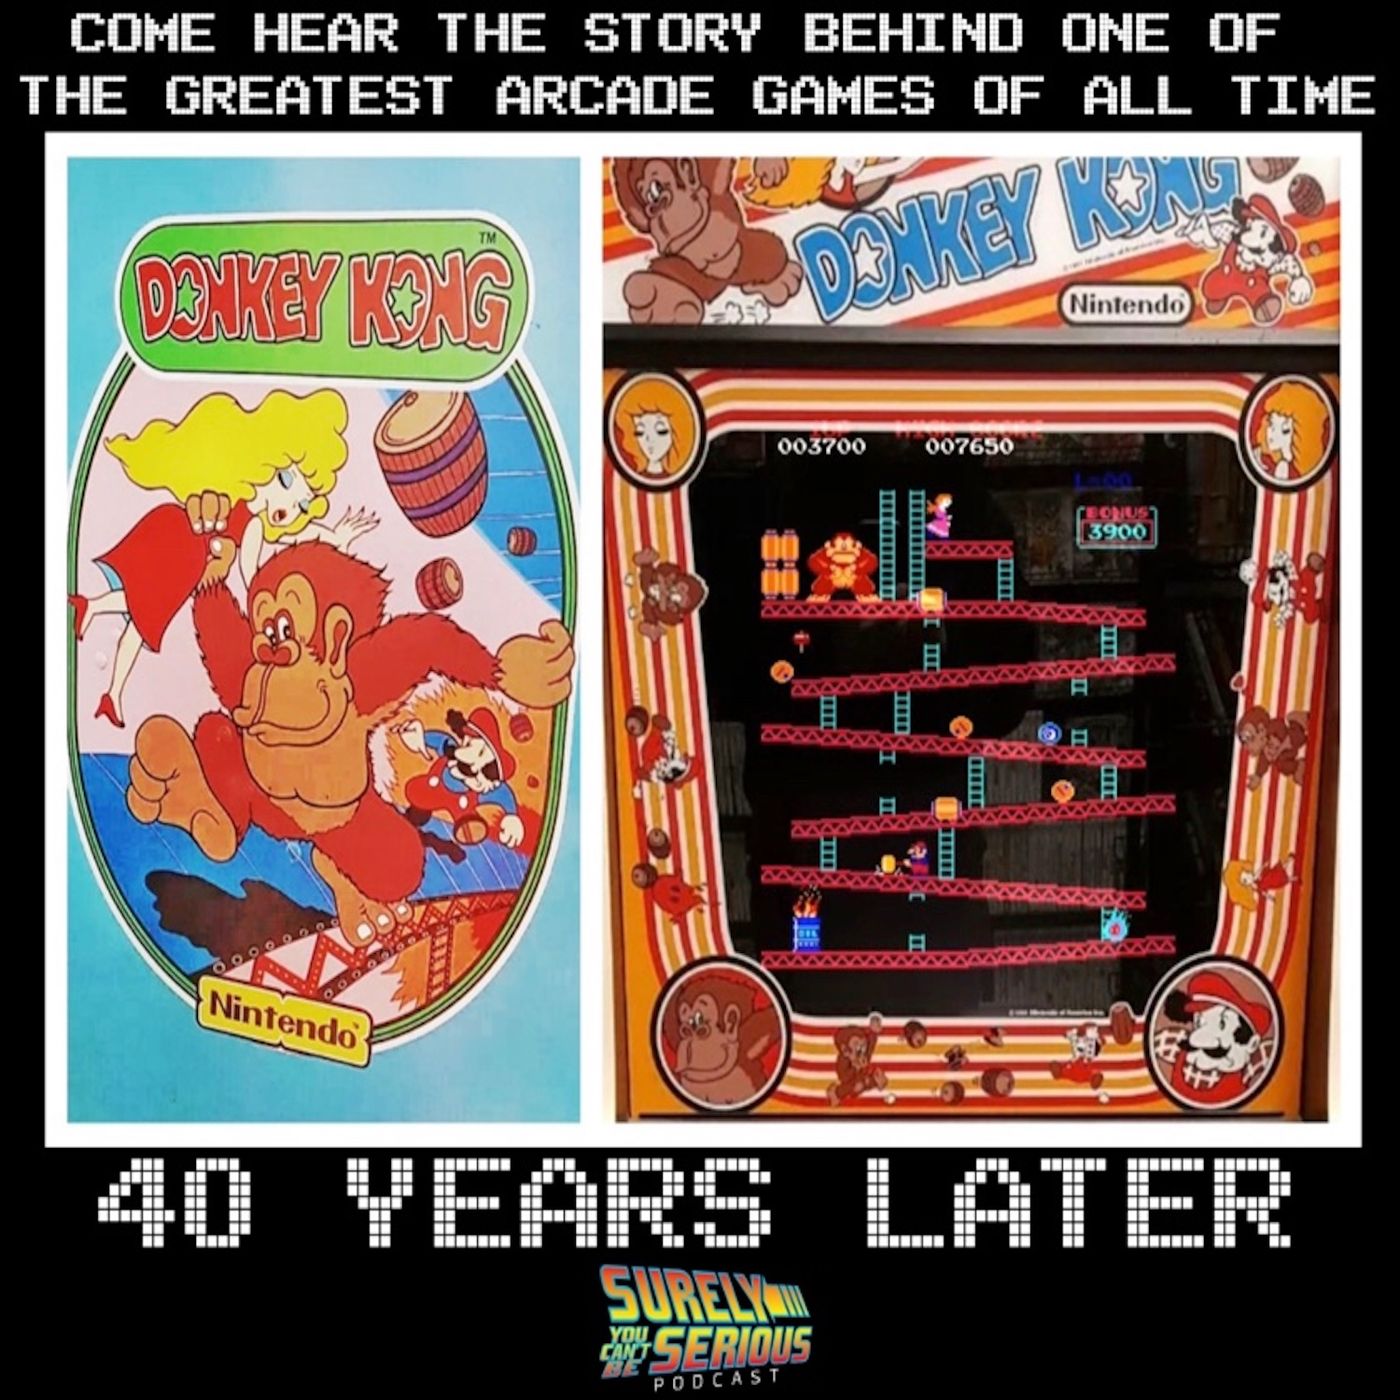 Donkey Kong is 40 years old! (Best of the arcade games of 1981) Image